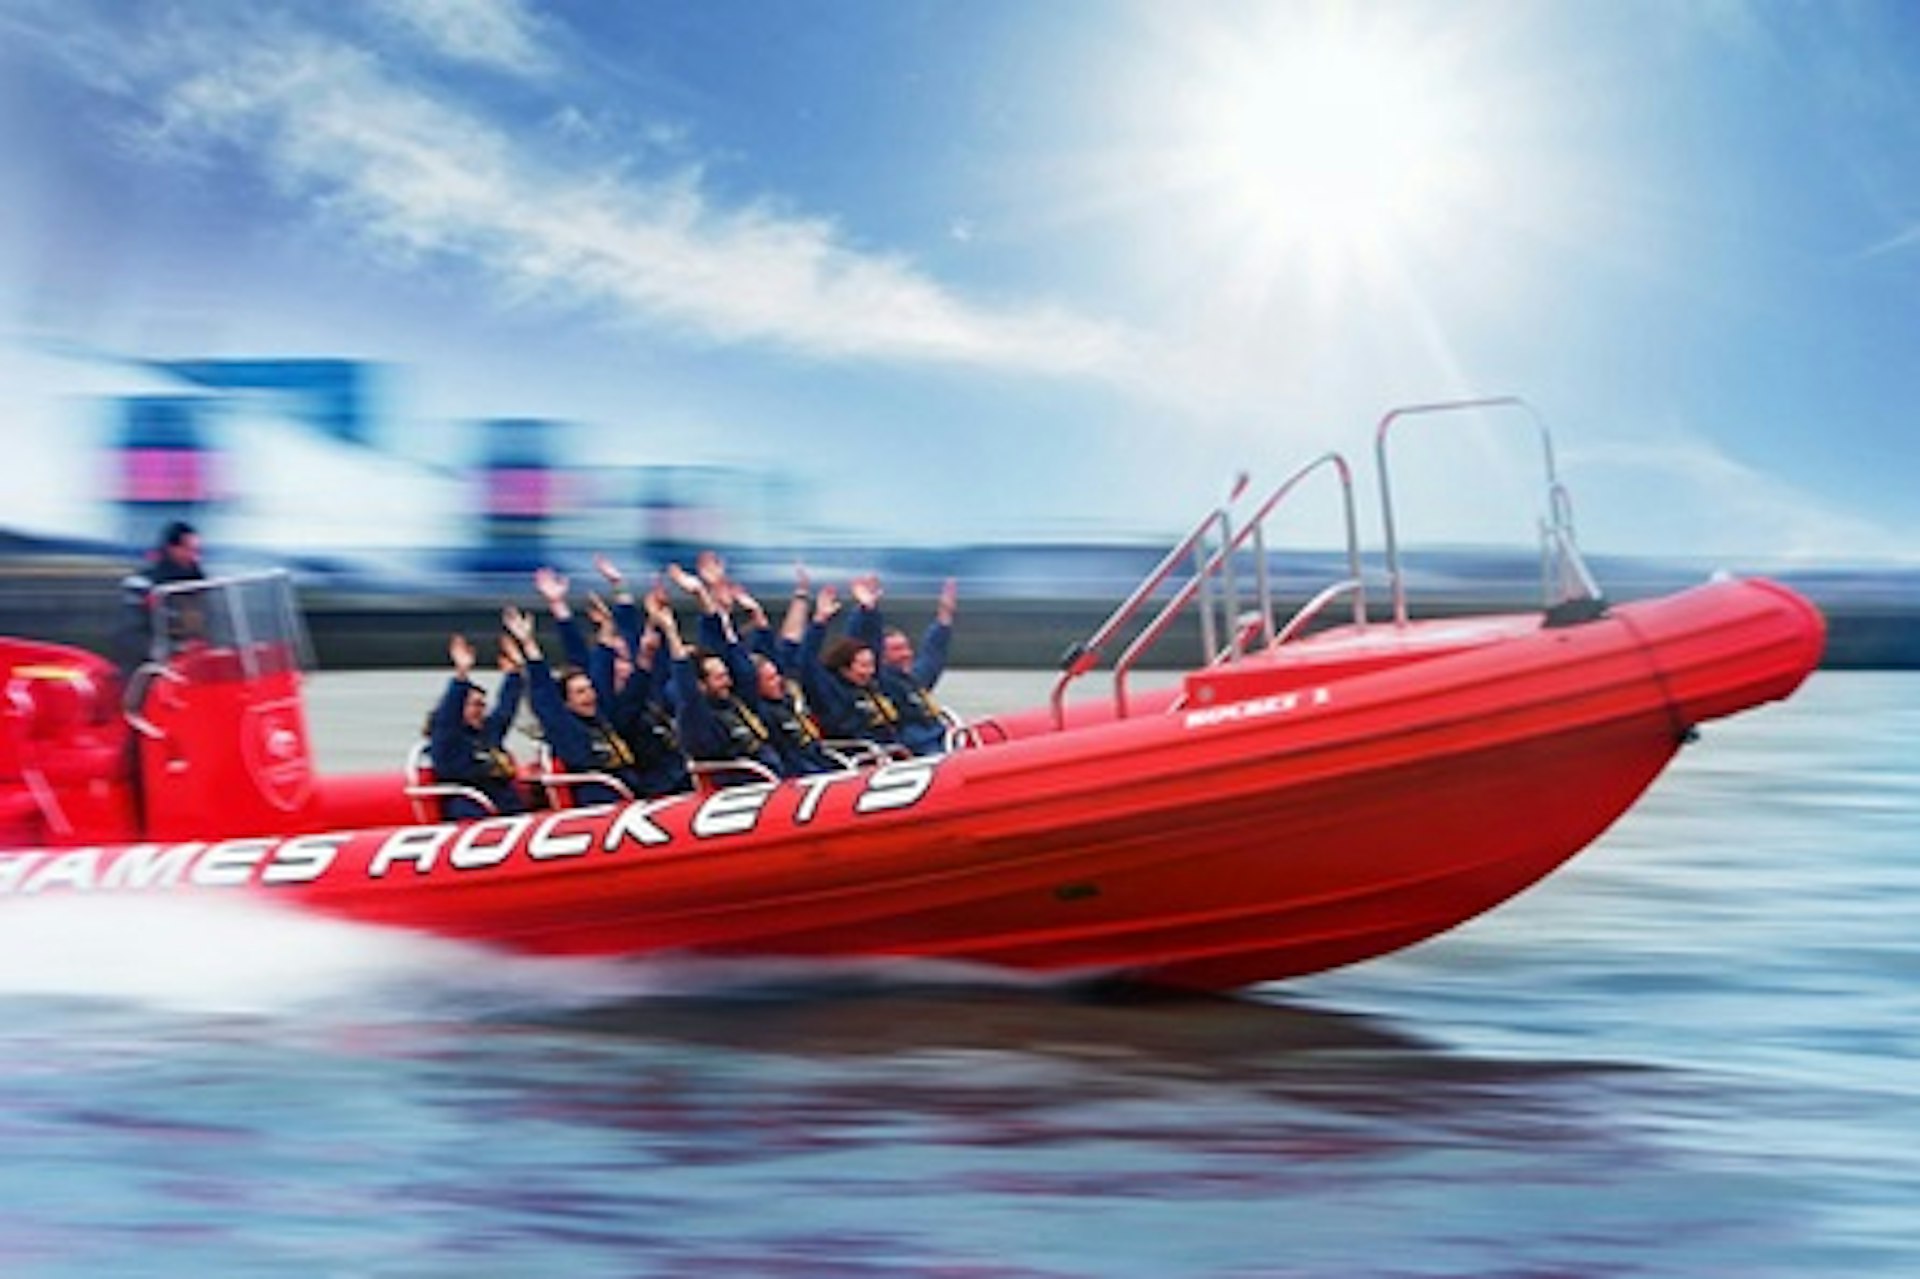 Thames Rockets Speed Boat Ride and Three Course Meal with Wine at Brasserie Blanc for Two 1